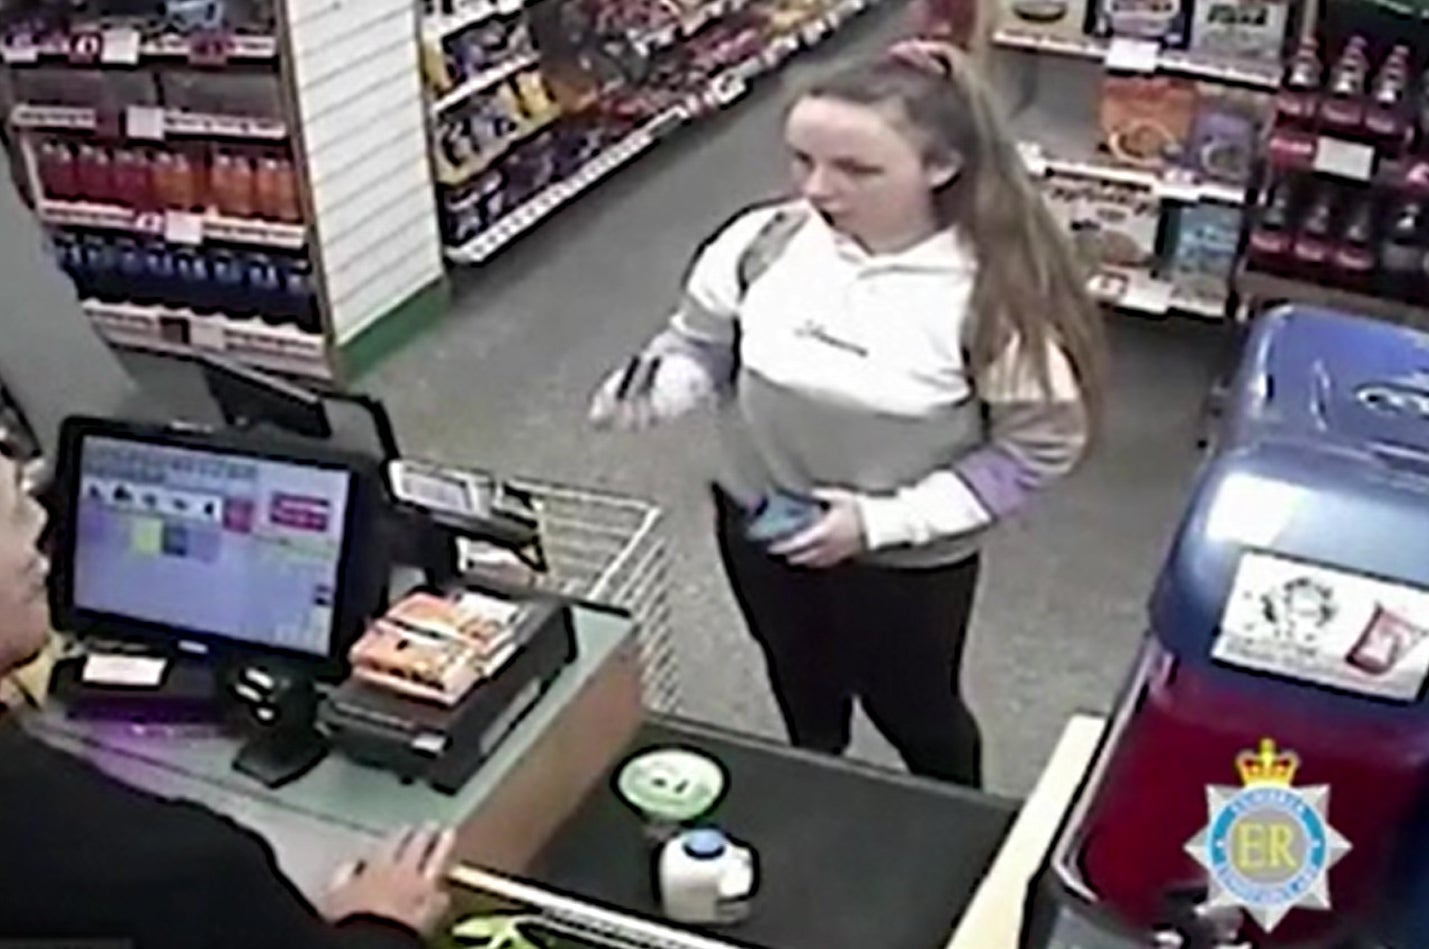 Screen grab taken from CCTV issued by Cumbria Police showing Eleanor Williams shopping in a Spar, at a time she claimed she was being trafficked